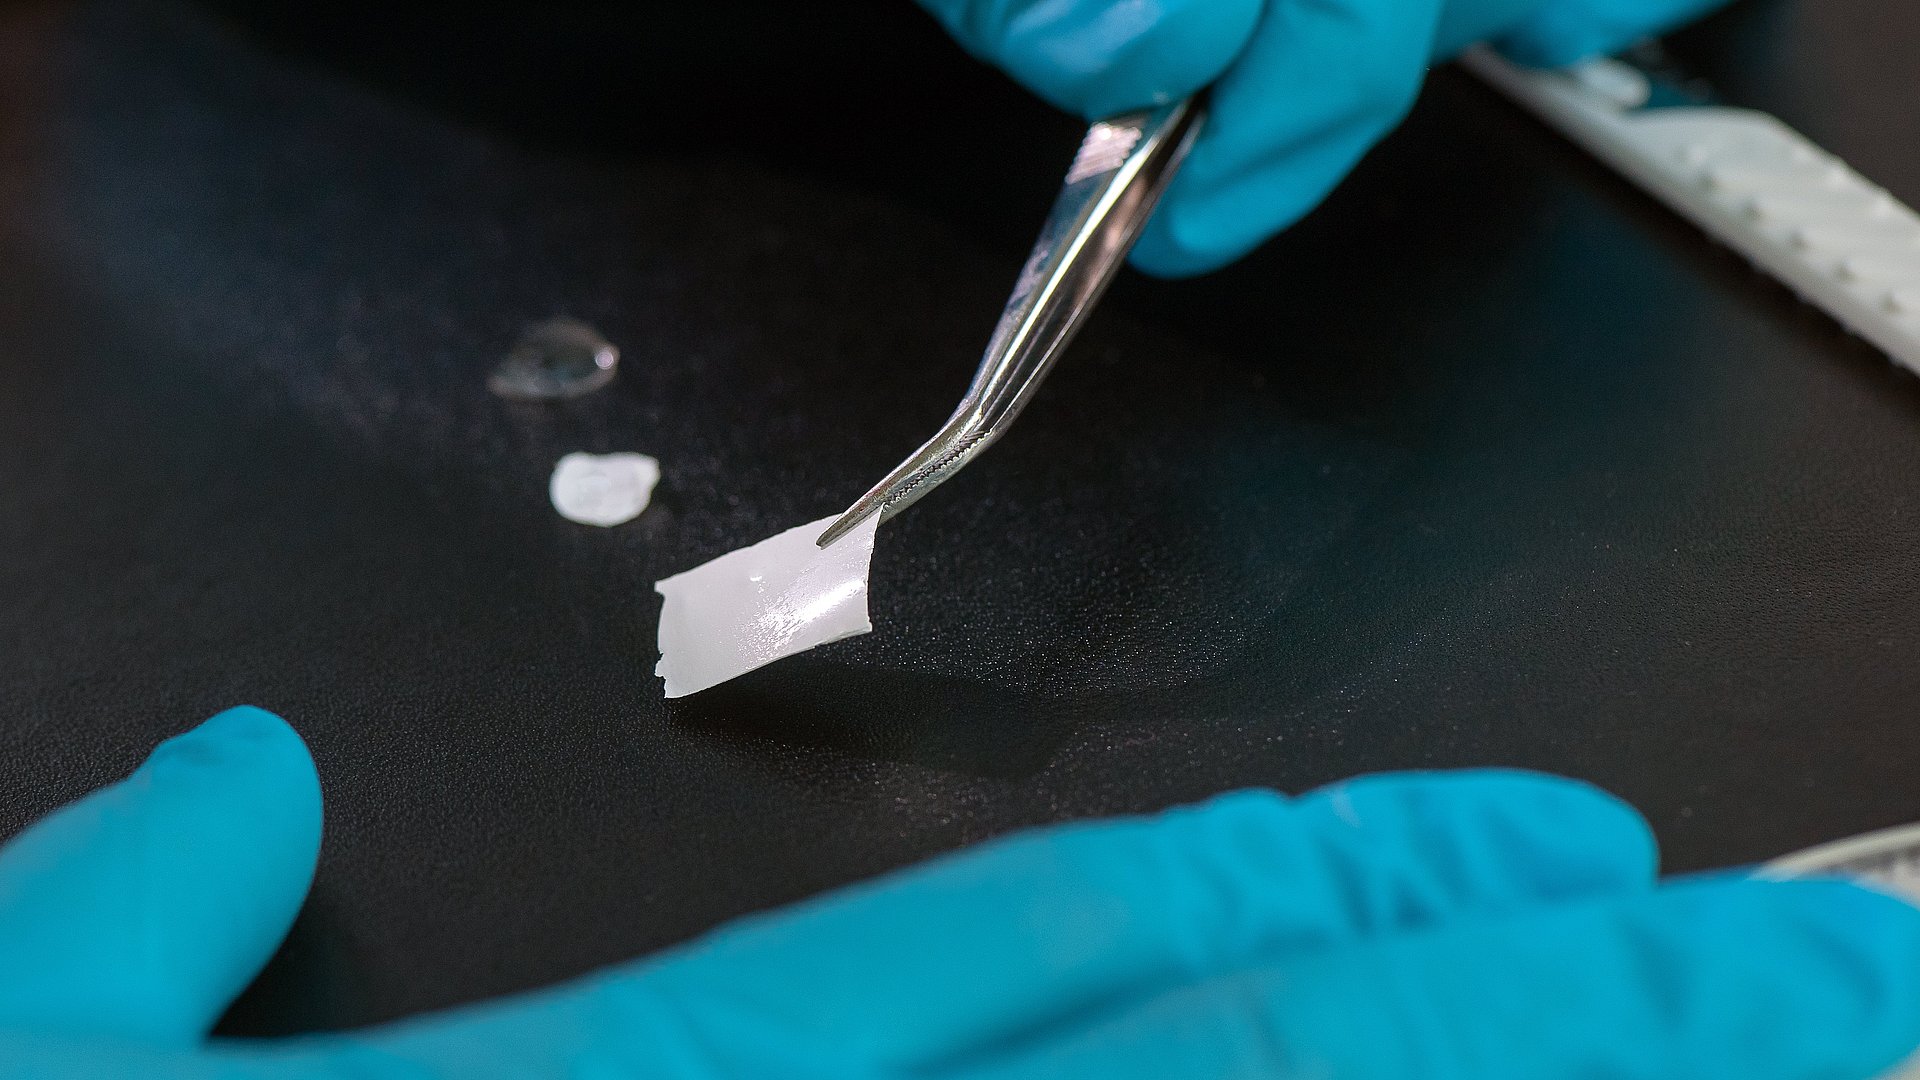 When dry, the novel biomolecular film can be picked up with tweezers can easily be placed onto a wound.